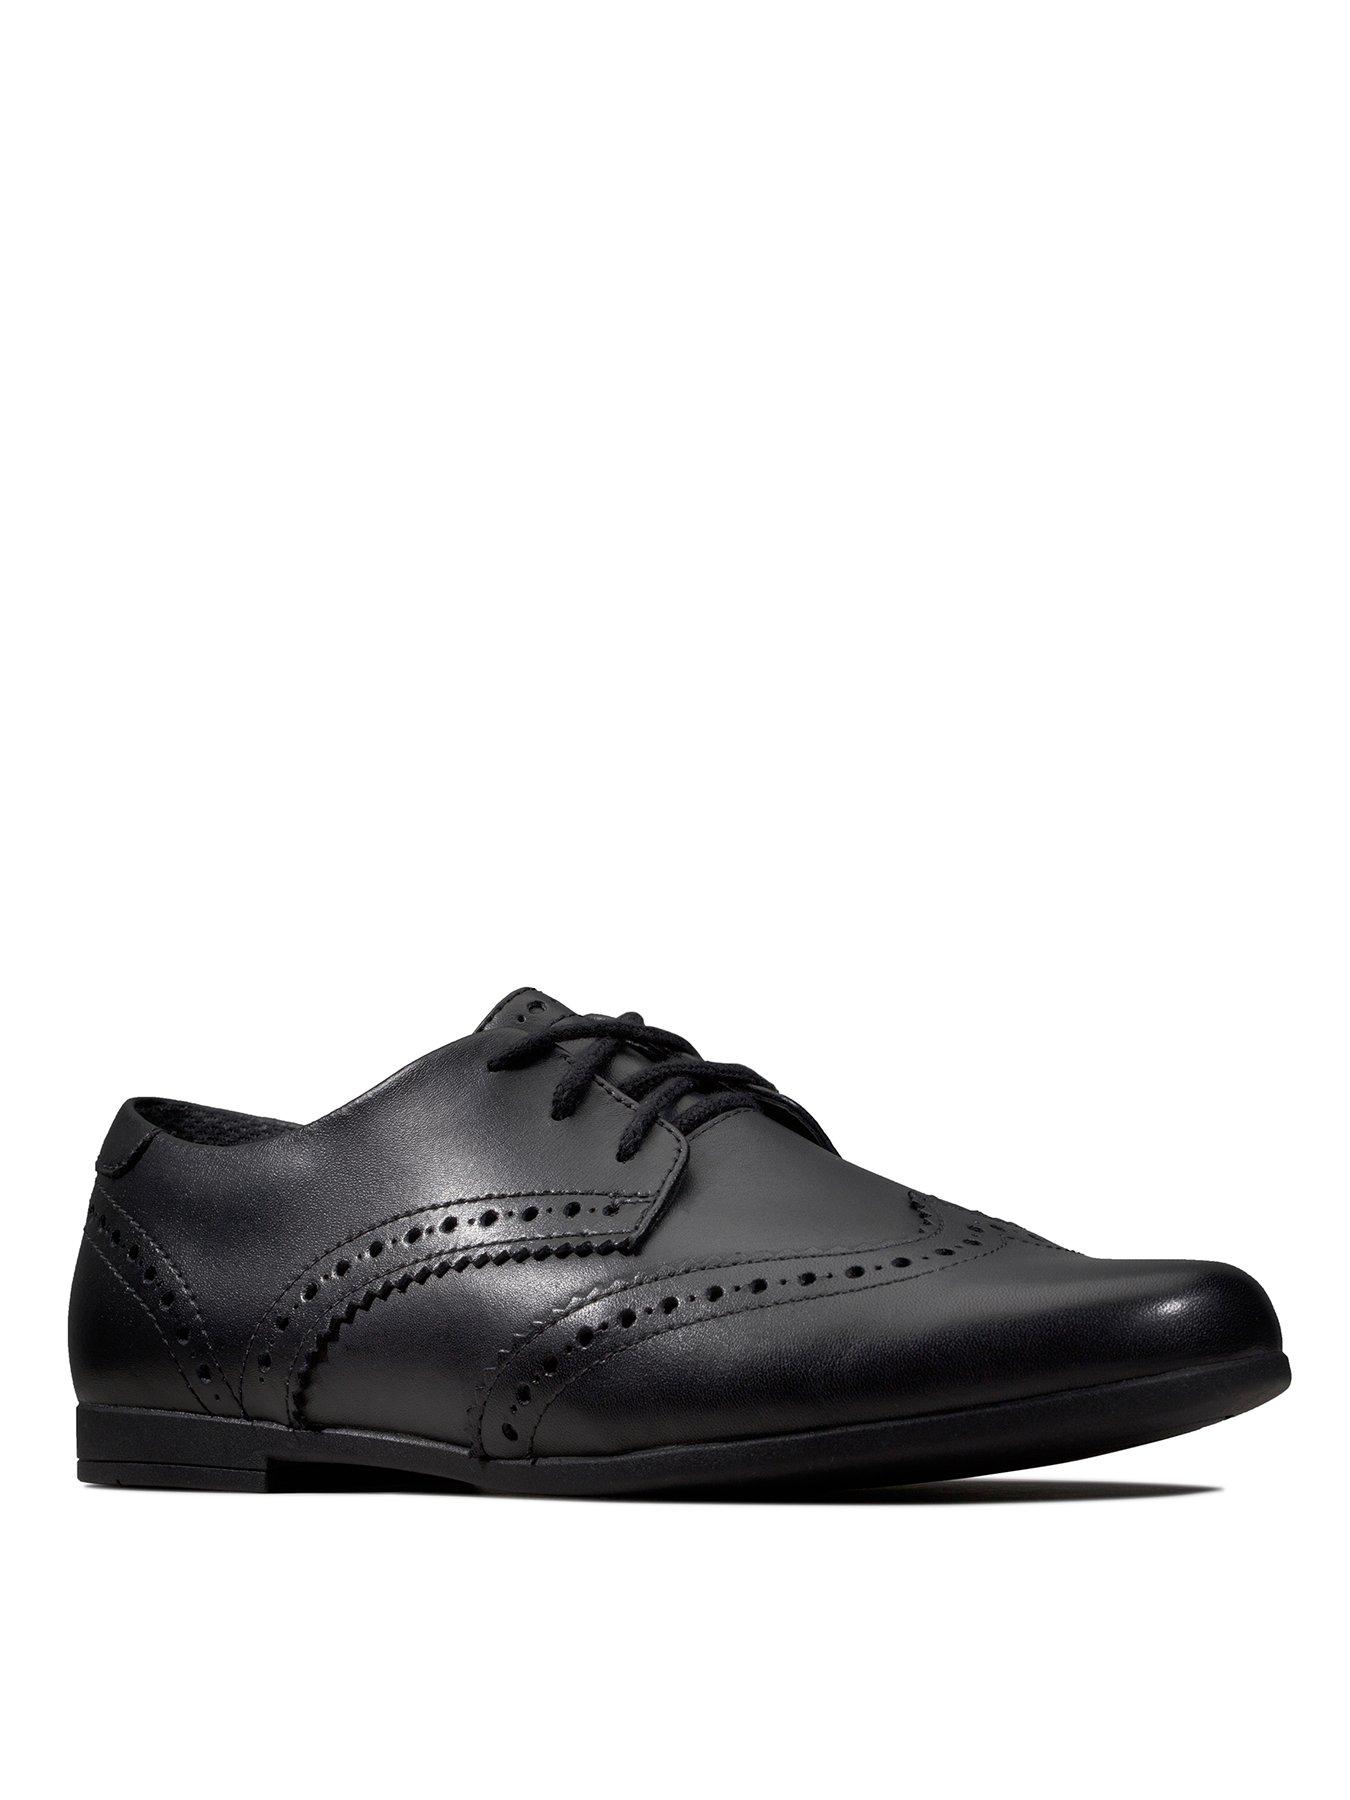 clarks shoes black leather